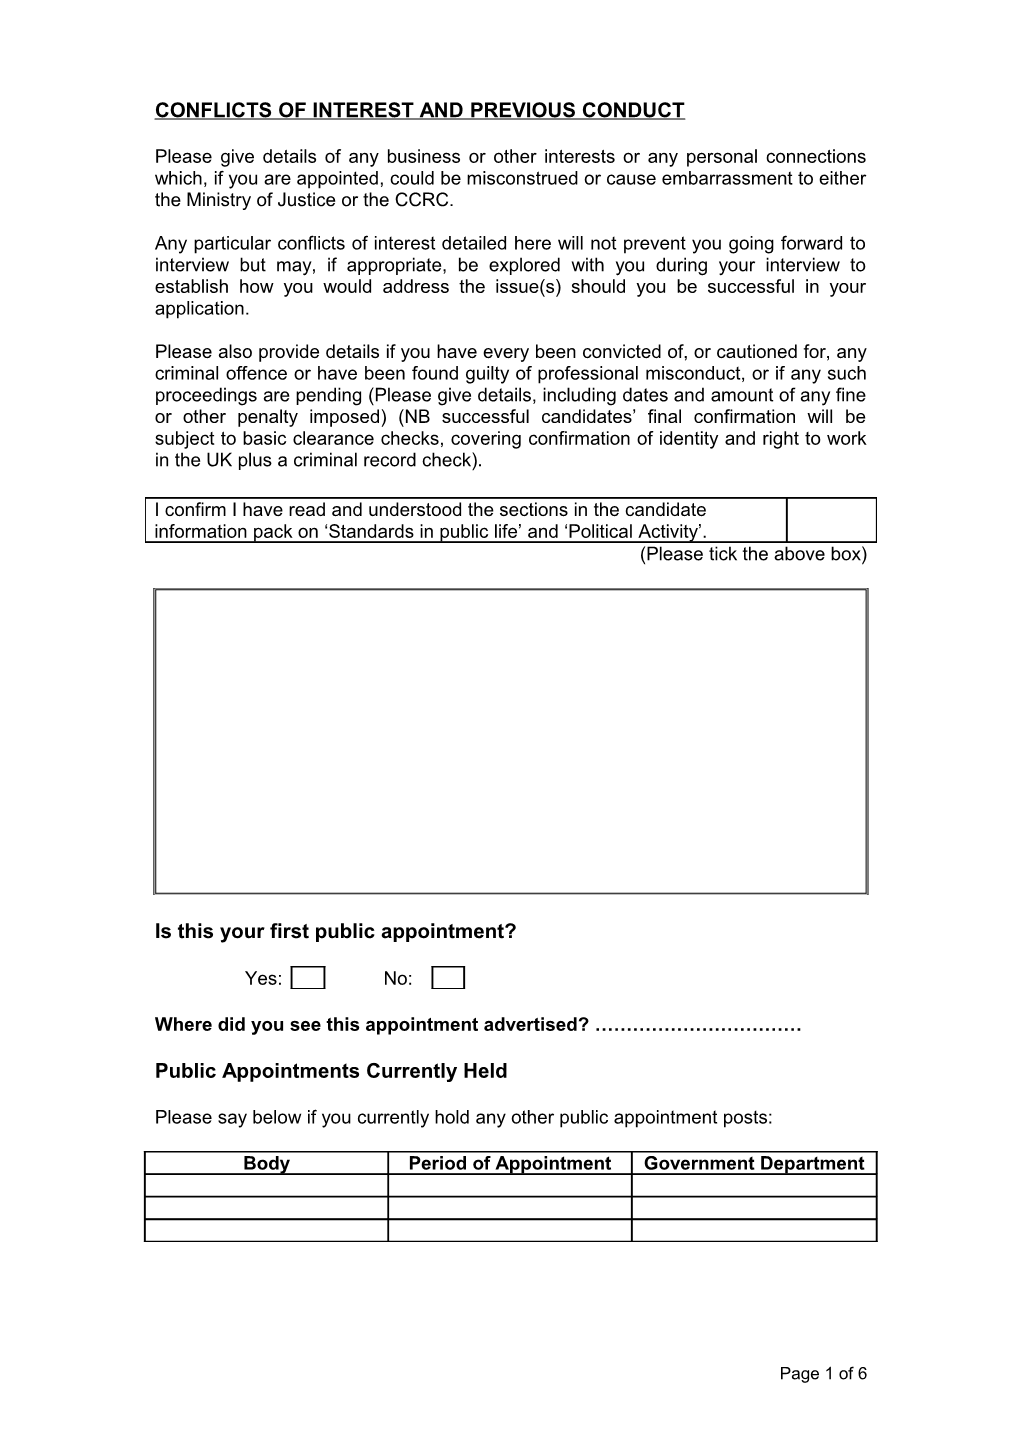 Information Supplied in Application Pack